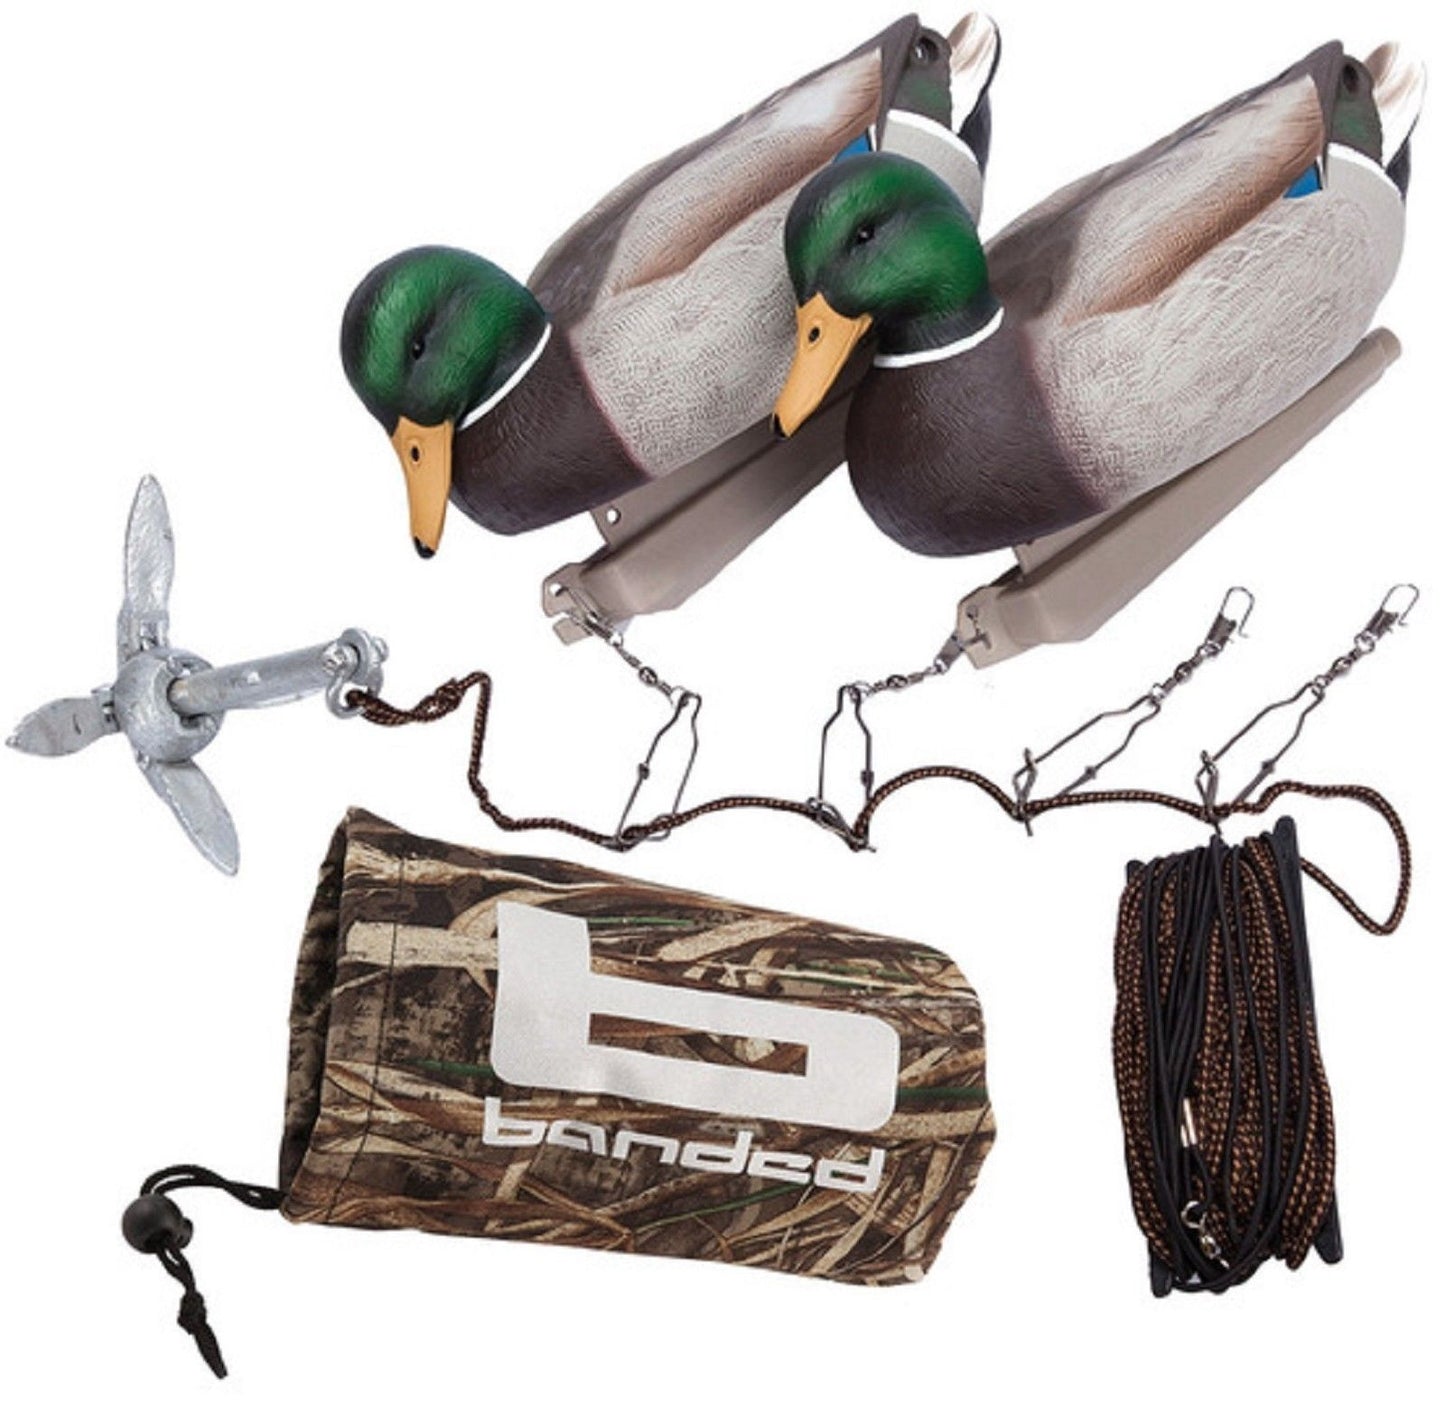 Banded Duck Hunting Jerk Cord Kit - Anchor & Rig Decoy Attachment Set & Case